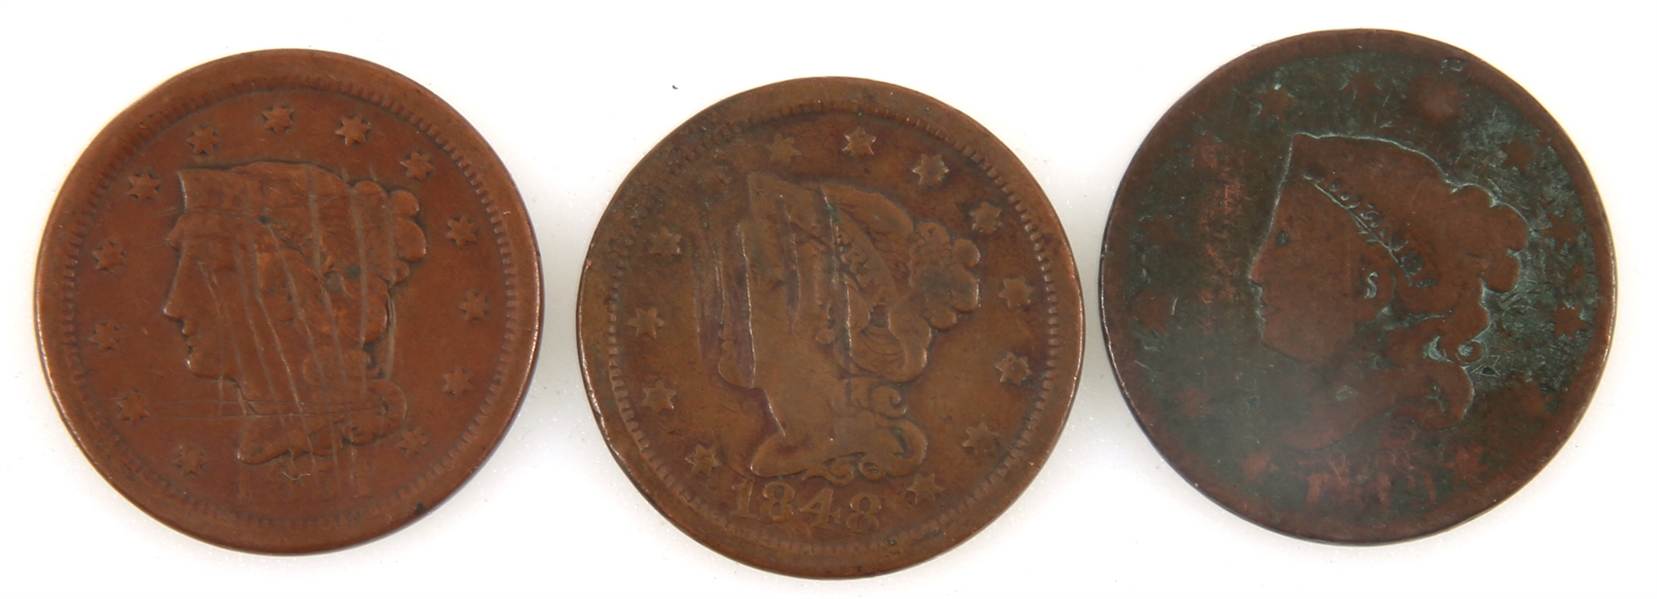 1819, 1848, & 1851 US LIBERTY HEAD LARGE CENT COINS